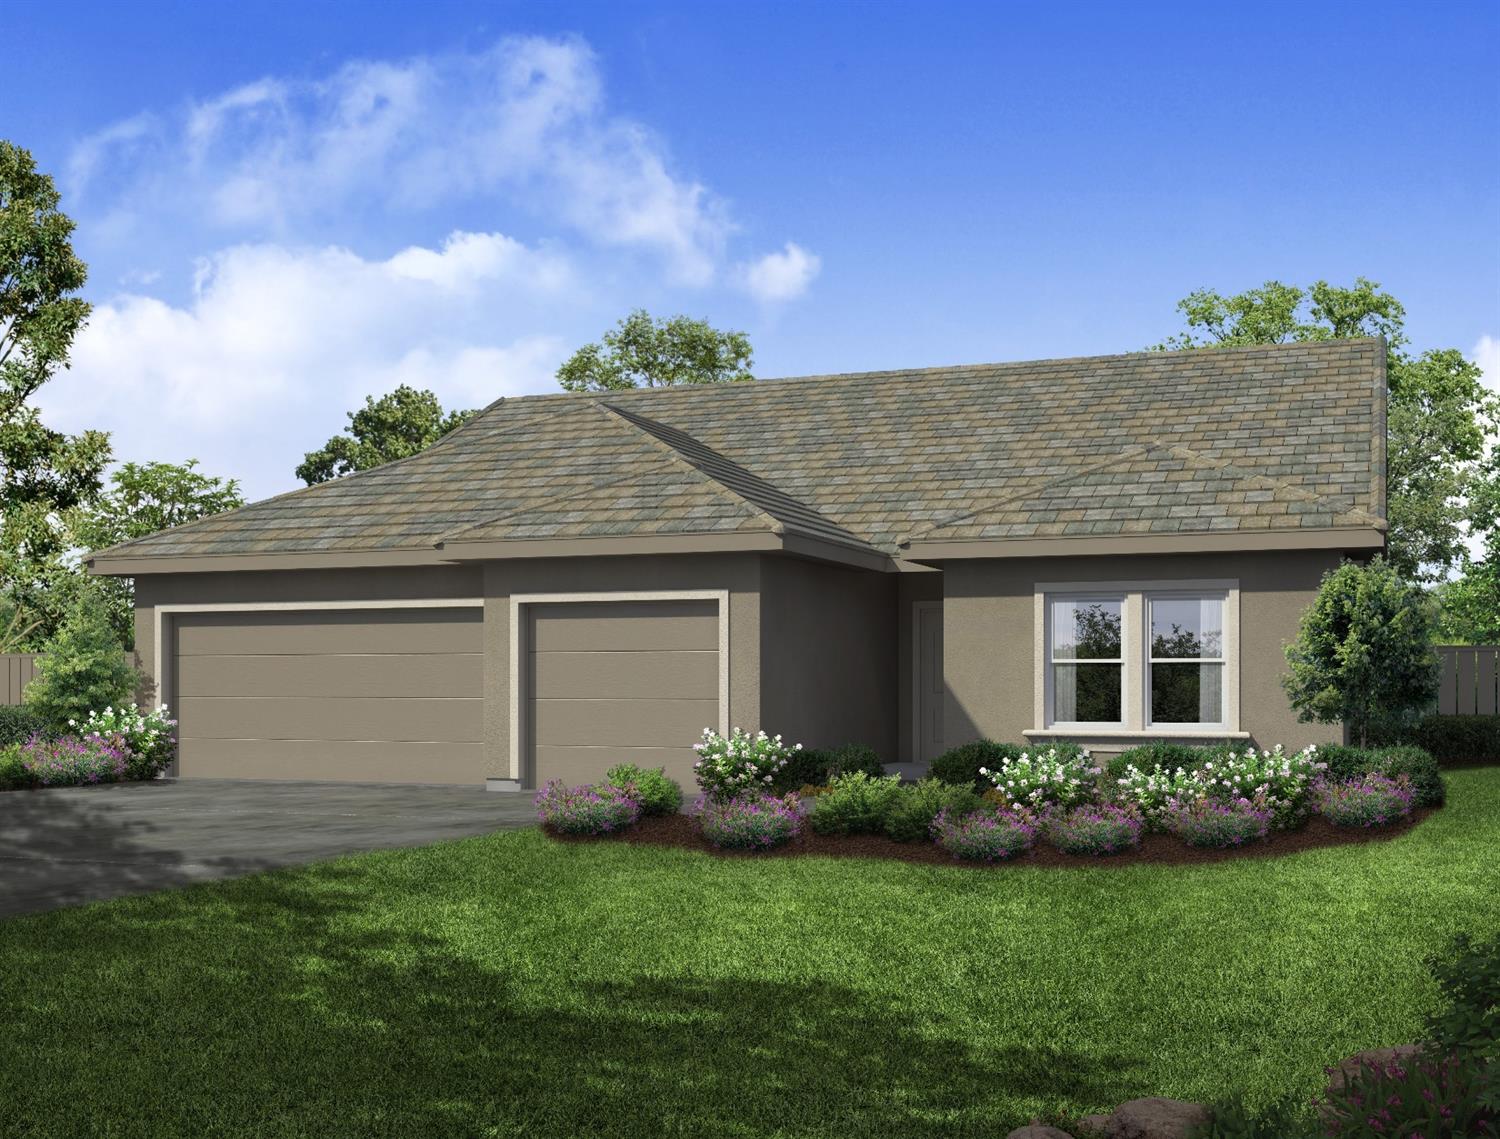 Rendering shown may not represent exact elevation being built. Buyer to verify elevation.